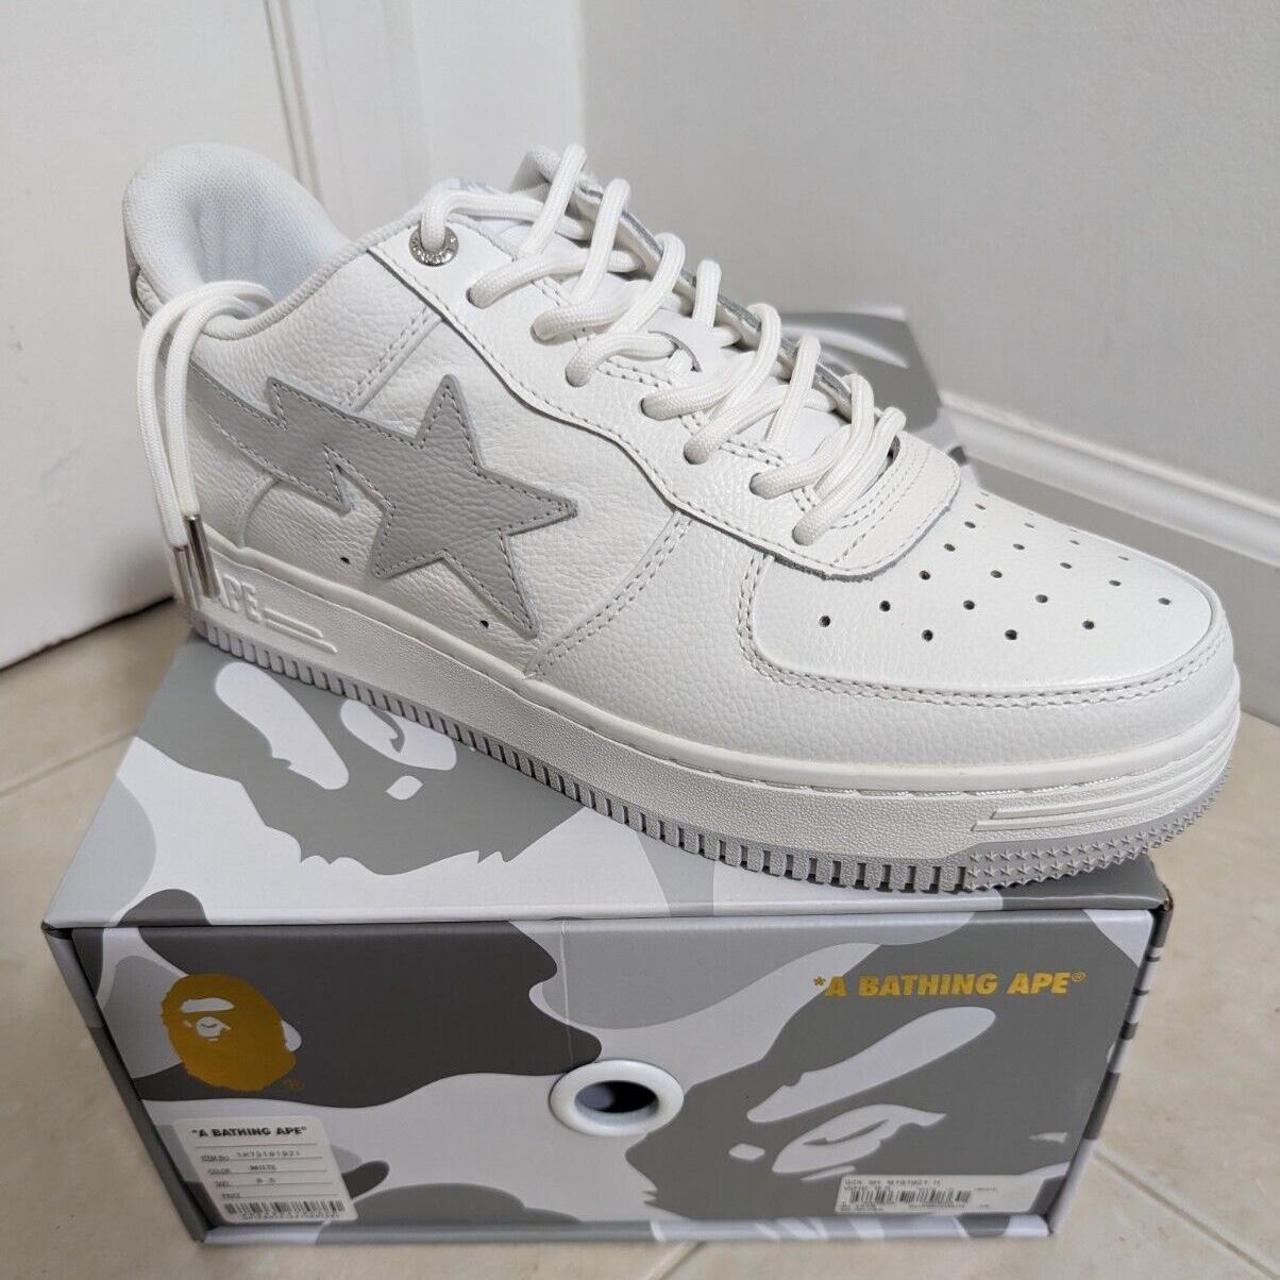 BAPE Men's Grey and White Trainers | Depop